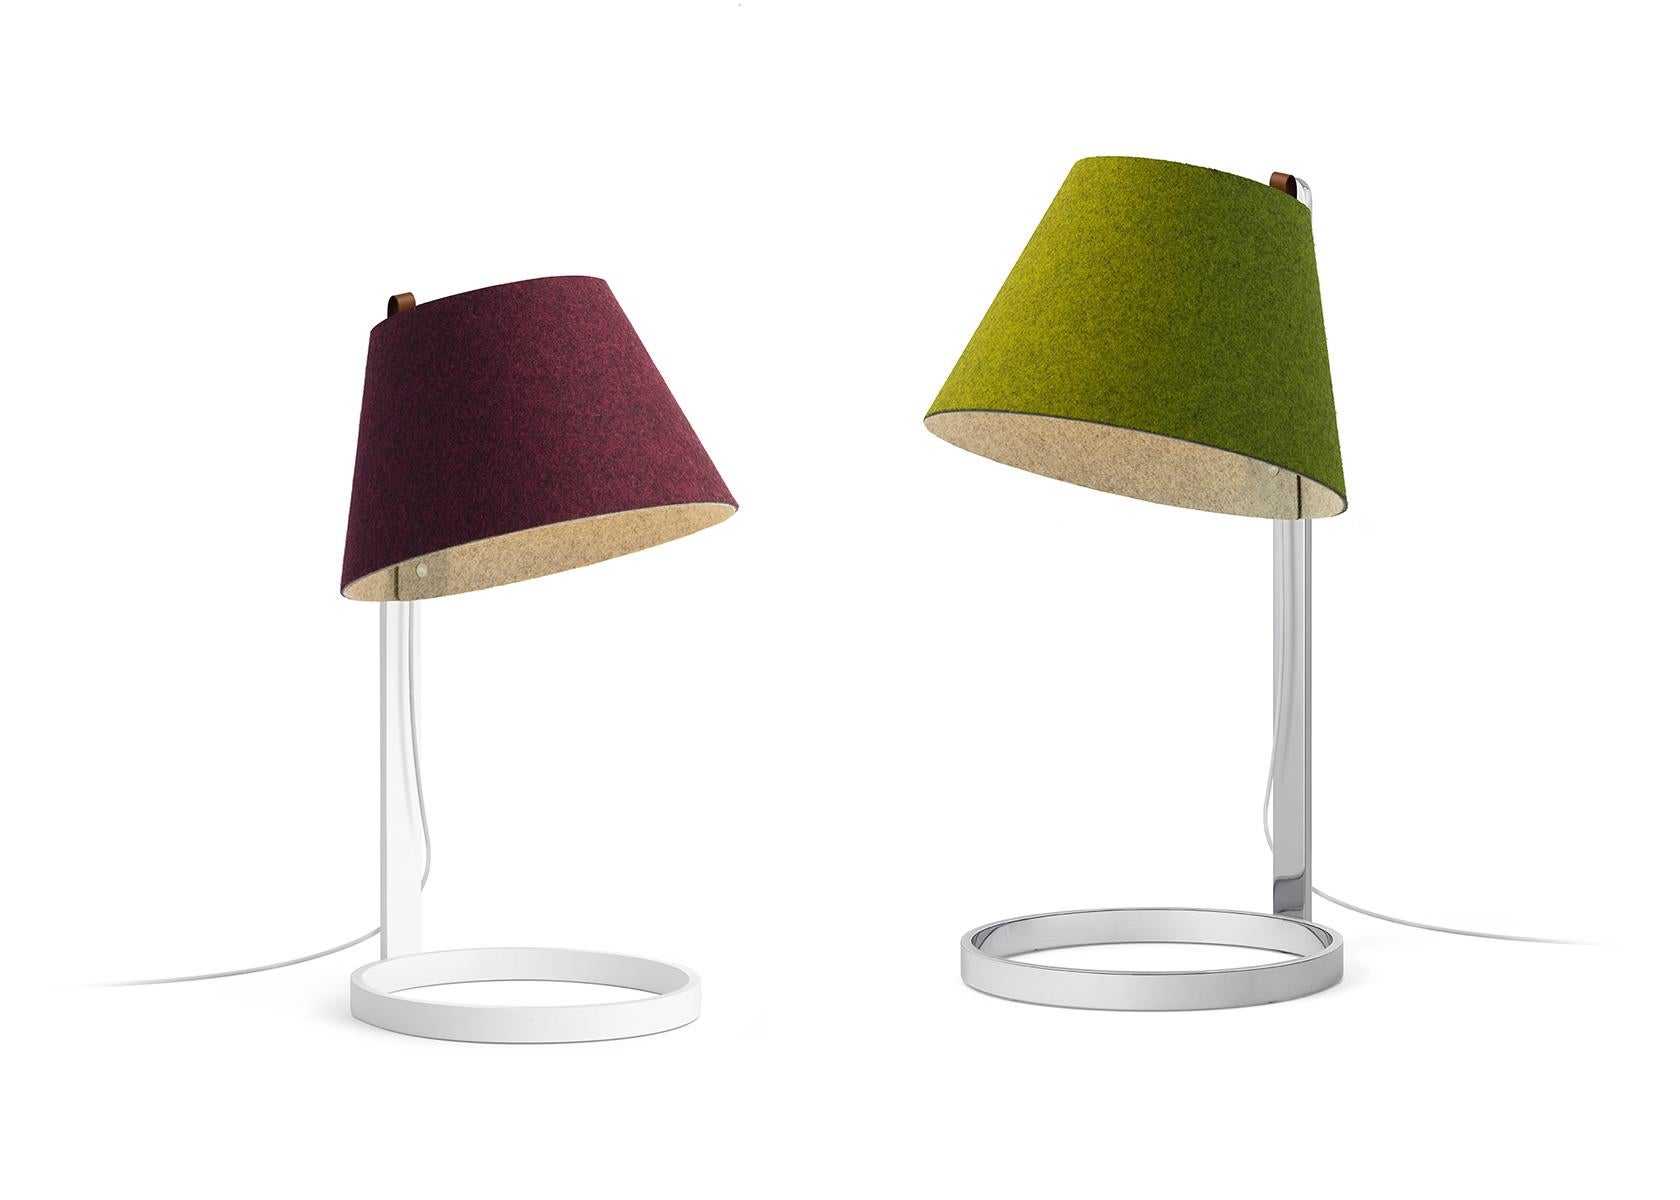 Modern Lana Small Table Lamp in Plum & Grey with White Base by Pablo Designs